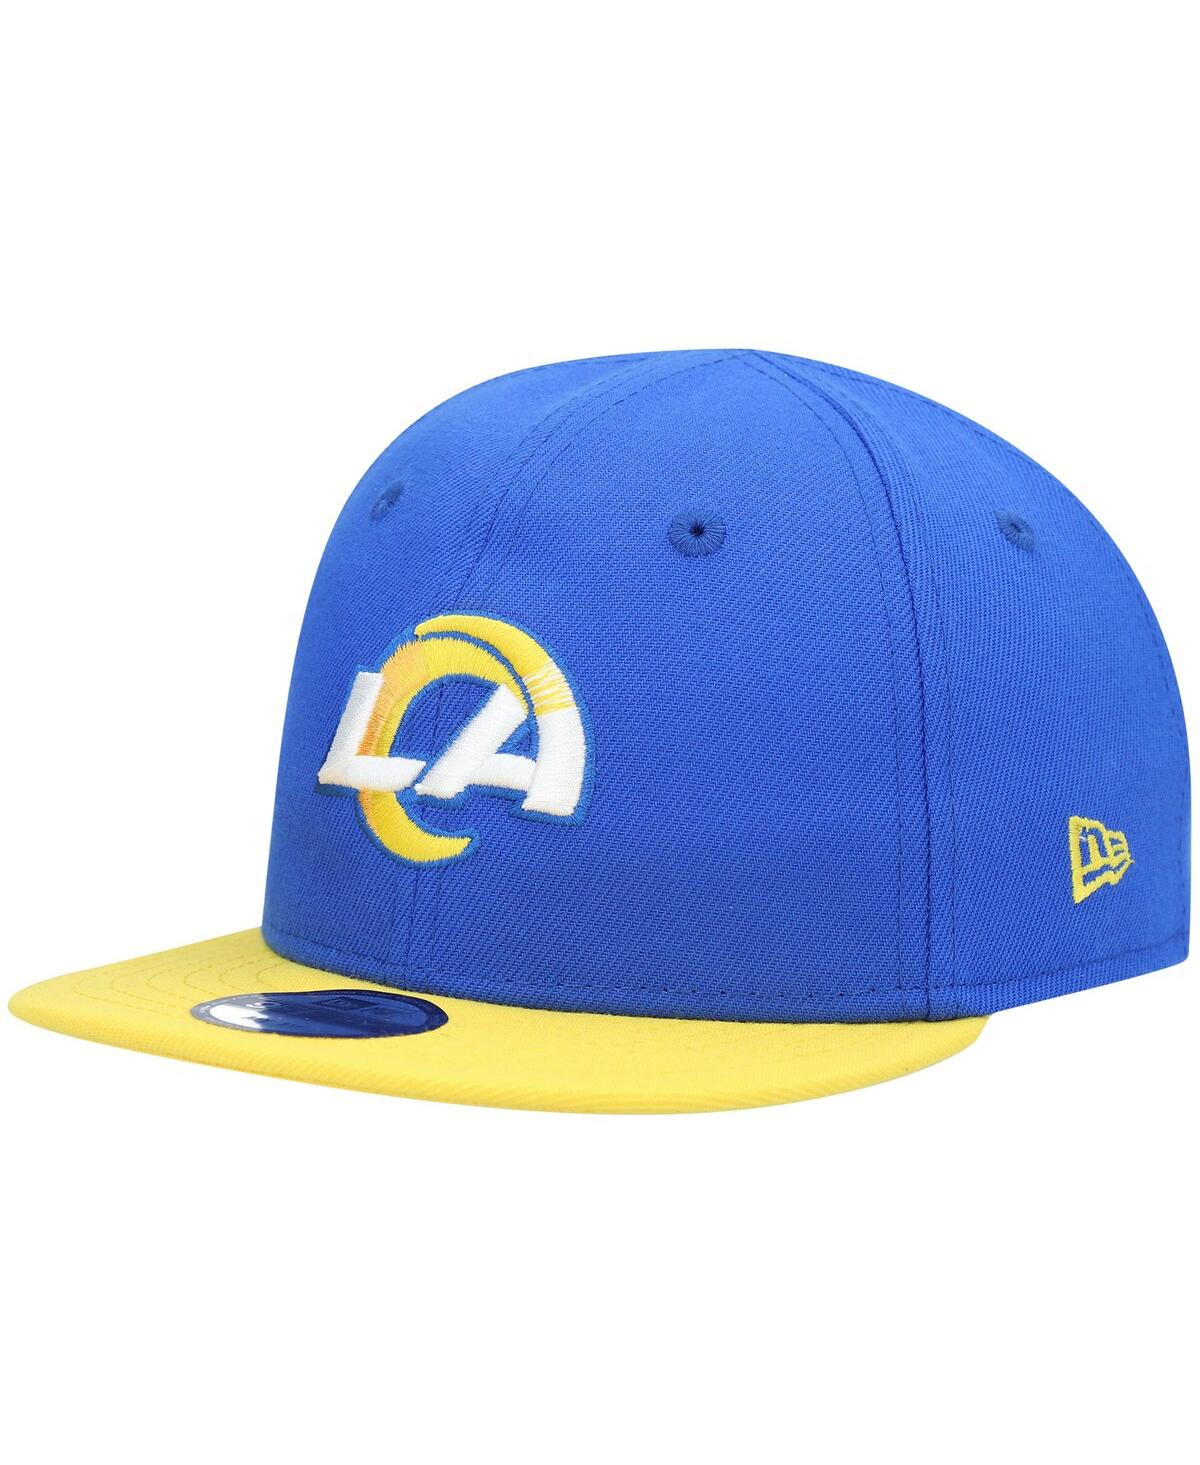 New Era Babies' Boys And Girls Infant  Royal, Gold Los Angeles Rams My 1st 9fifty Adjustable Hat